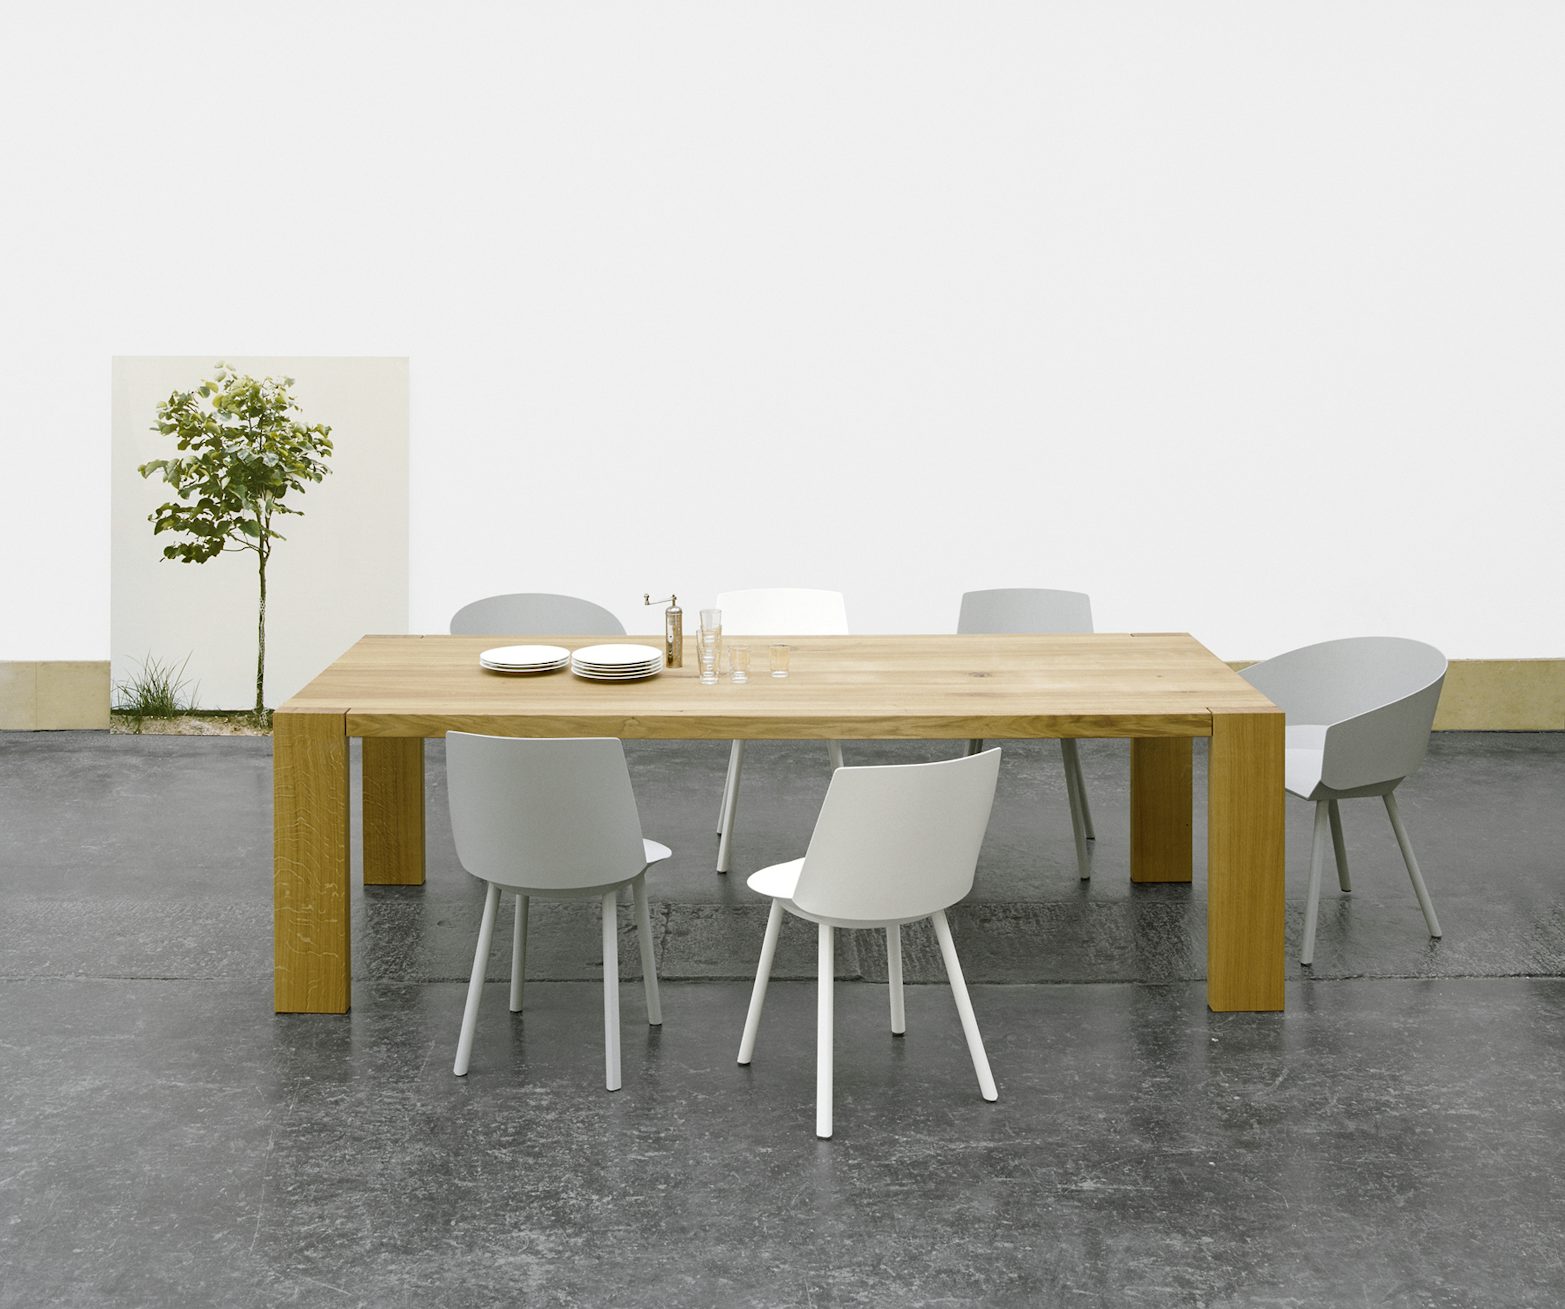 e15 london table in oiled oak with houdini side chair in signal white and smoke grey